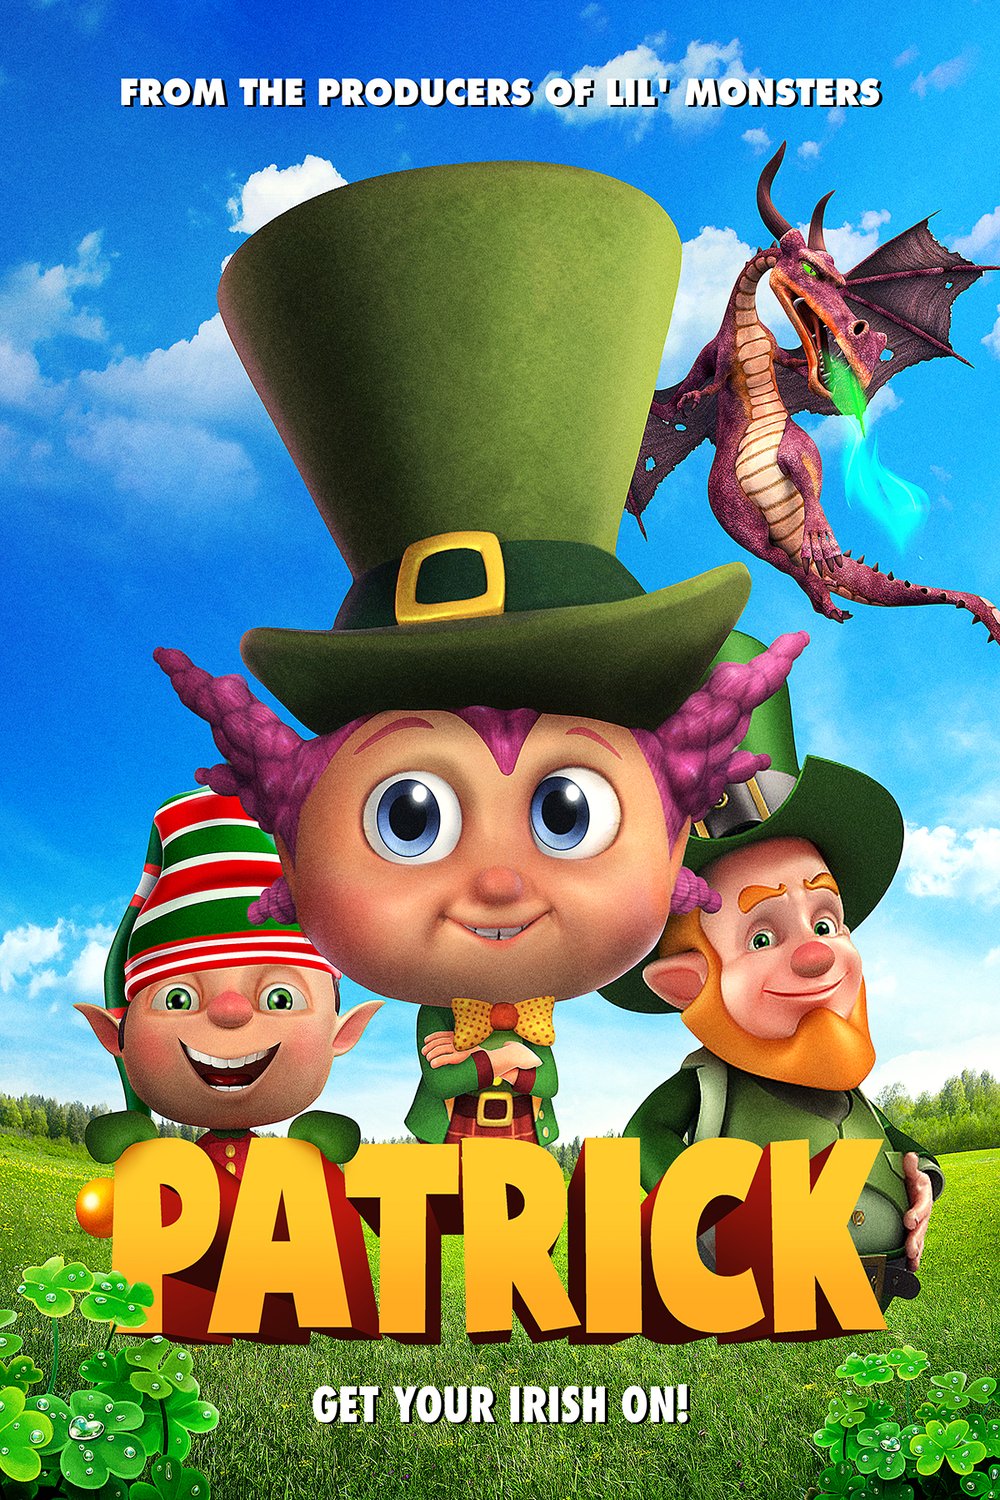 Poster of the movie Patrick